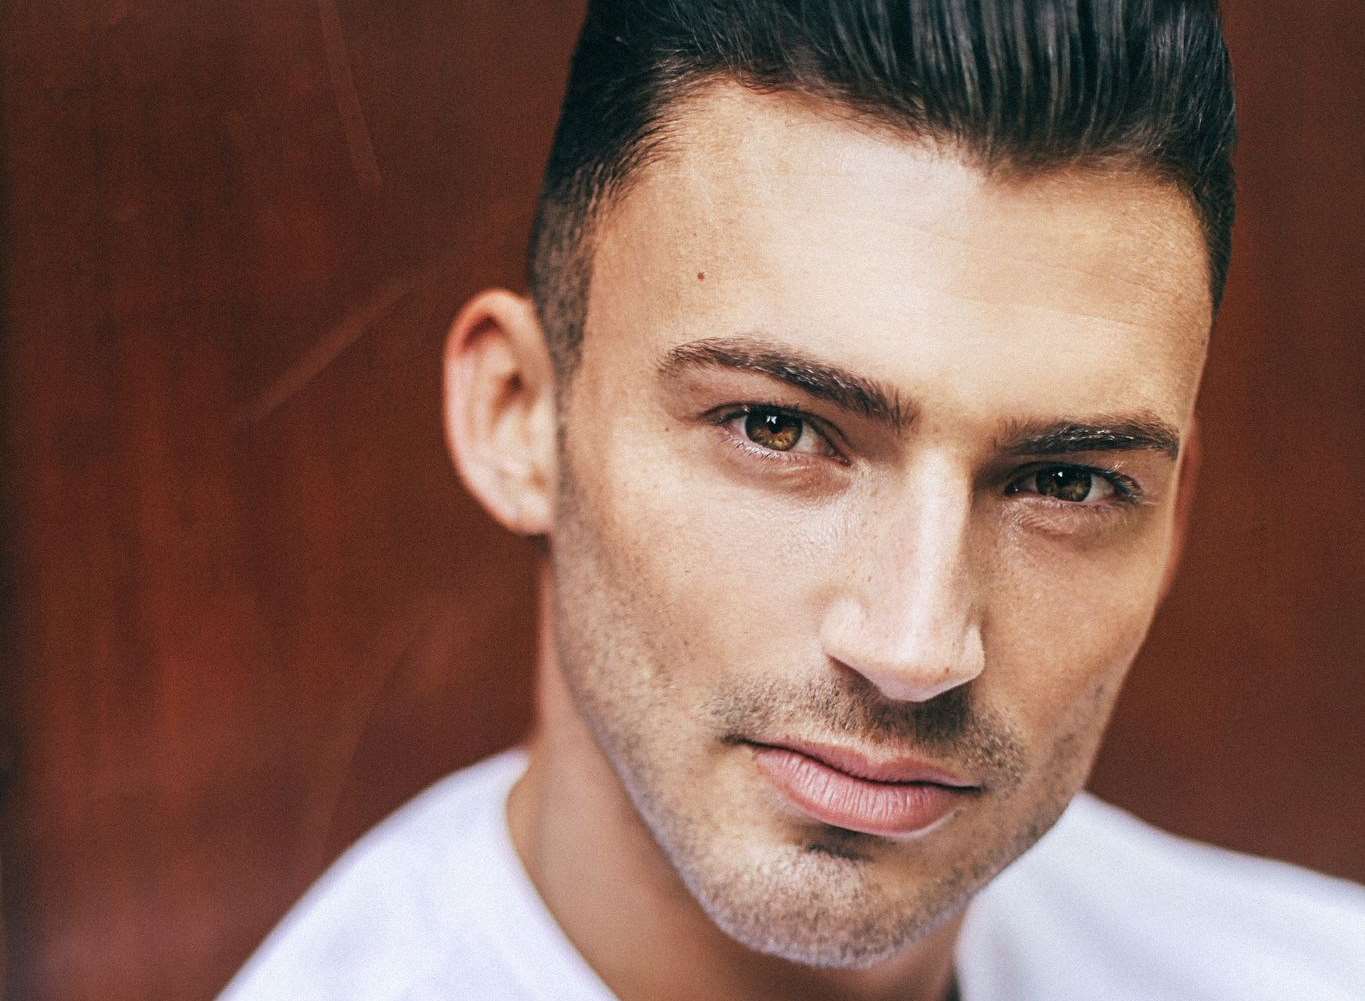 Former X Factor contestant and I'm a Celebrity runner-up Jake Quickenden